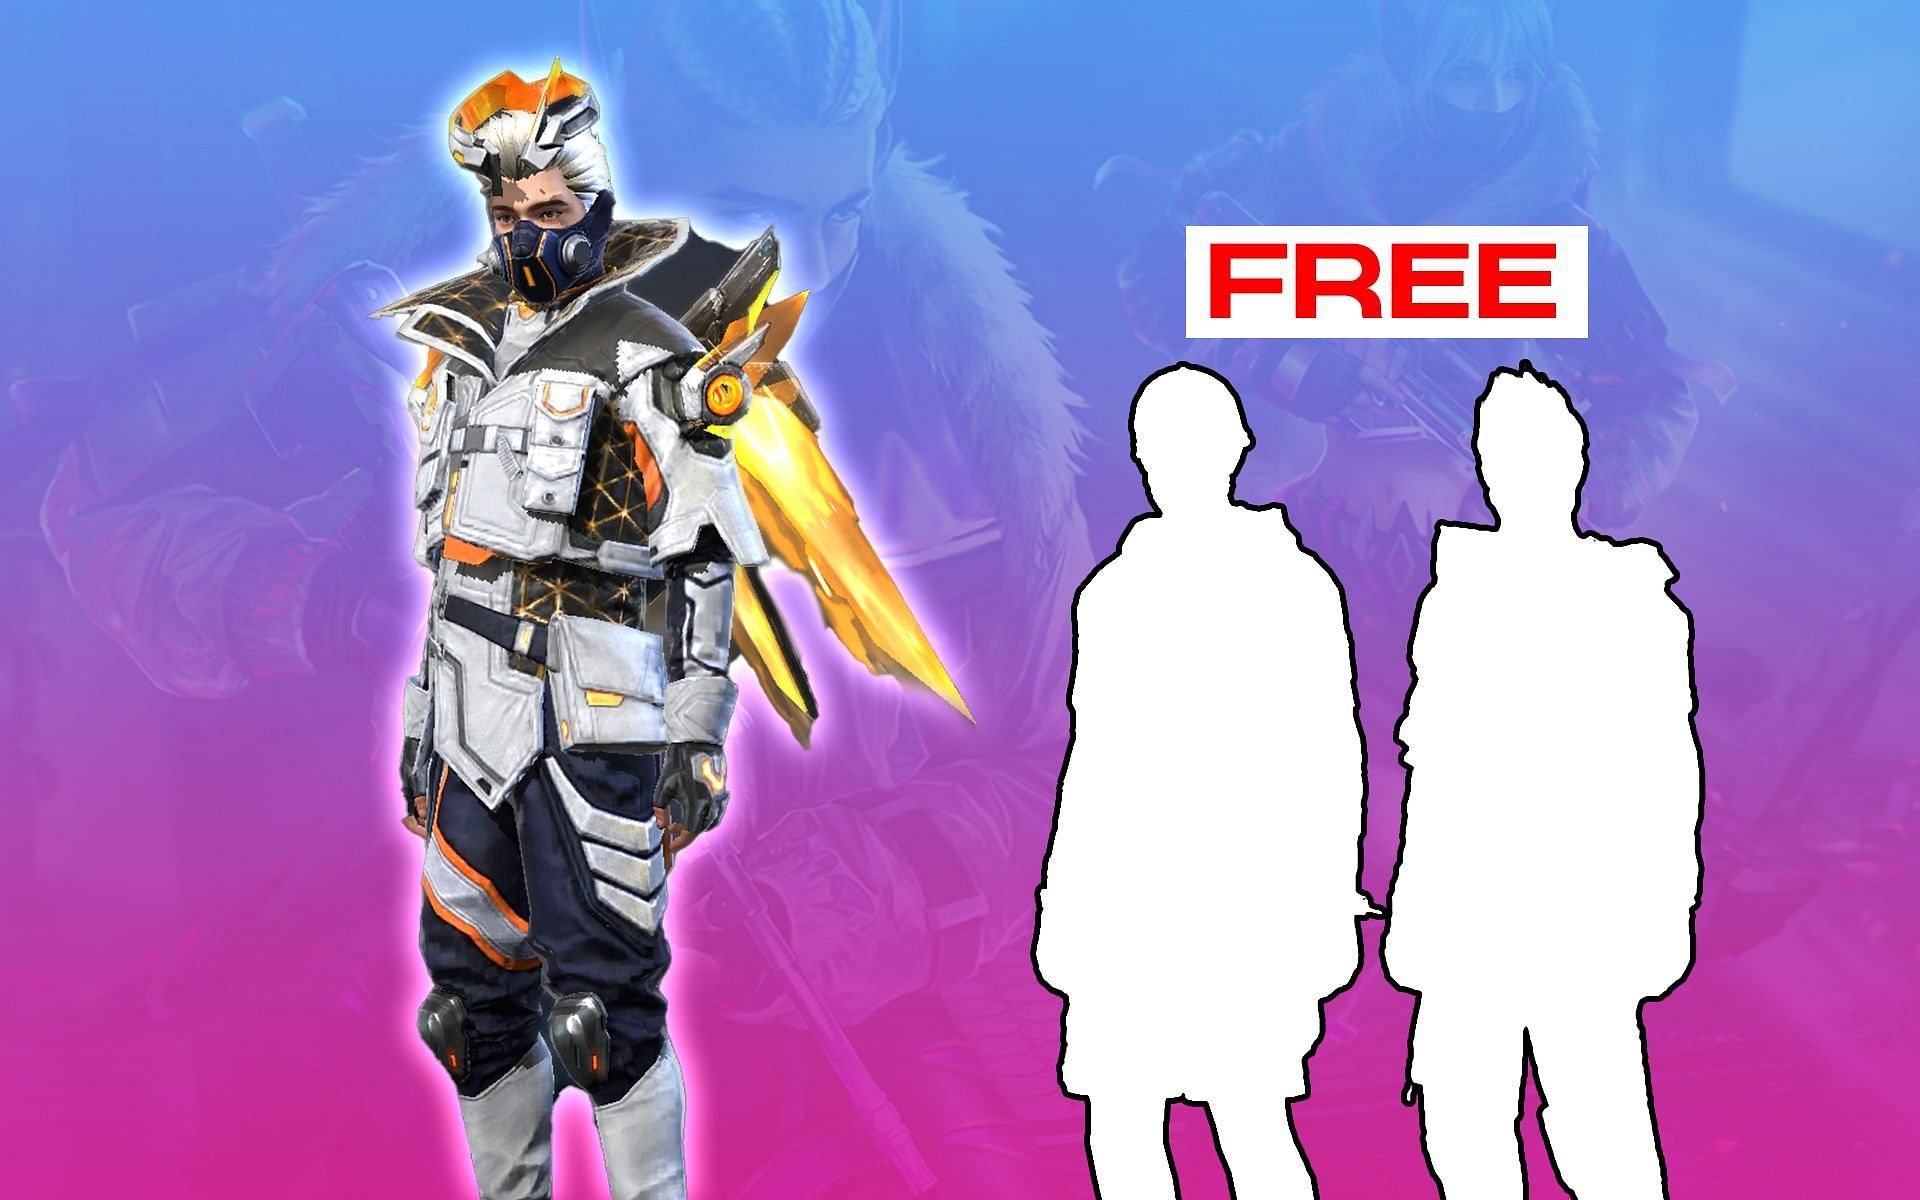 Many Free Fire players crave to get costume bundles in the game (Image via Sportskeeda)